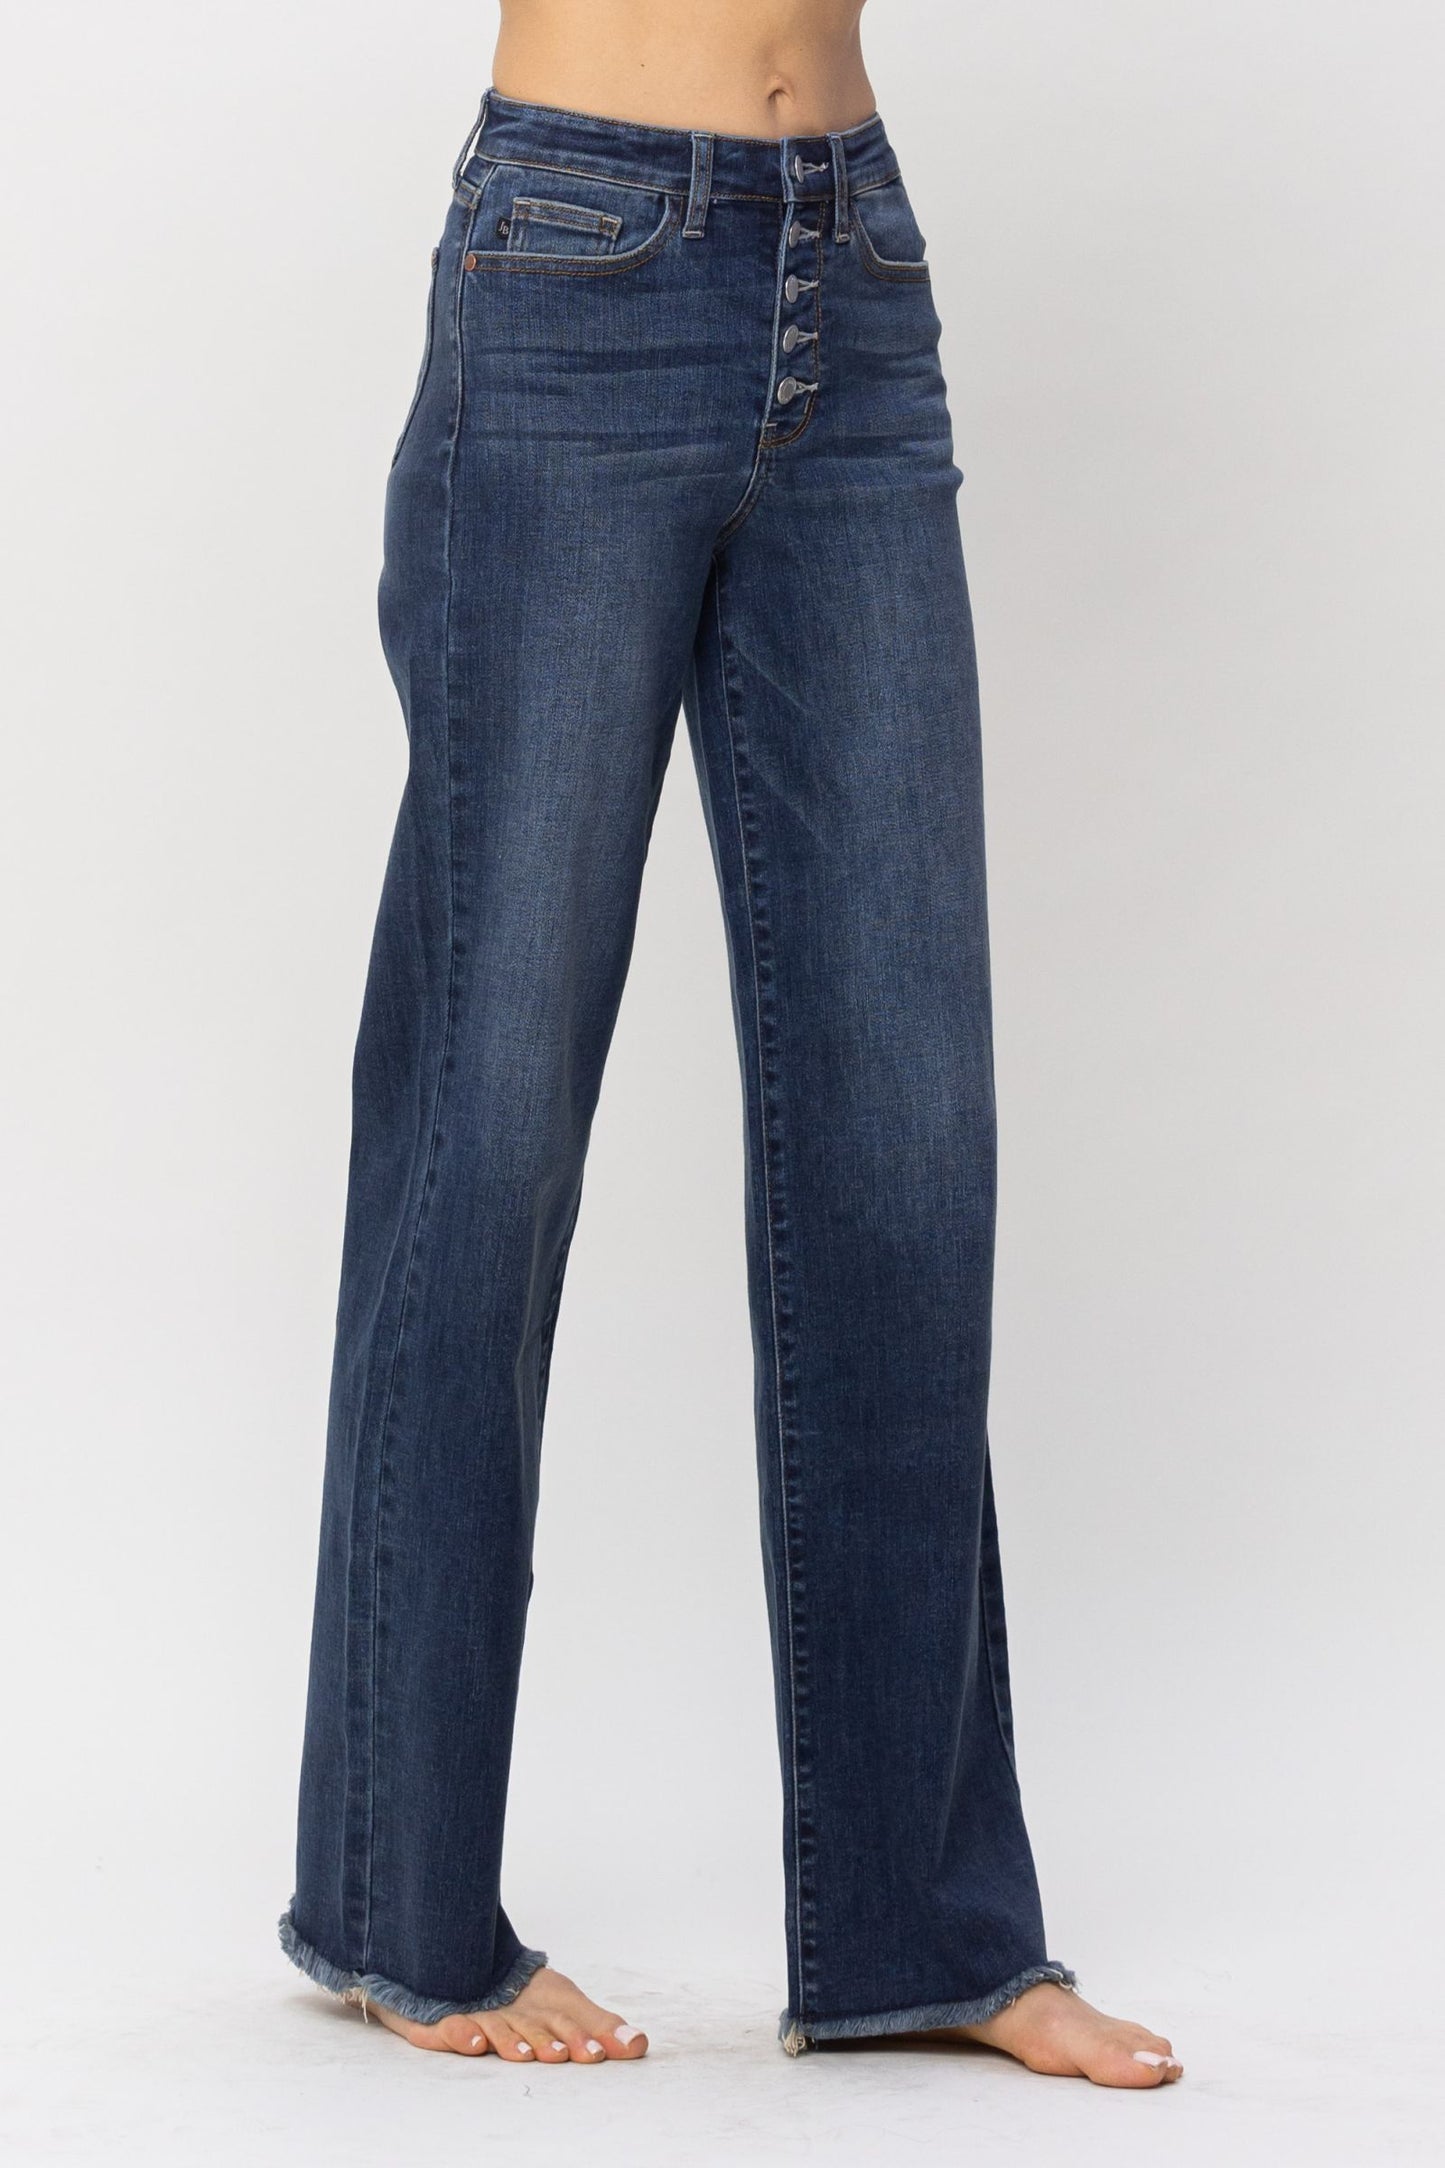 Judy Blue® Dark Wash Button Fly Jeans With Fray Edge on Leg